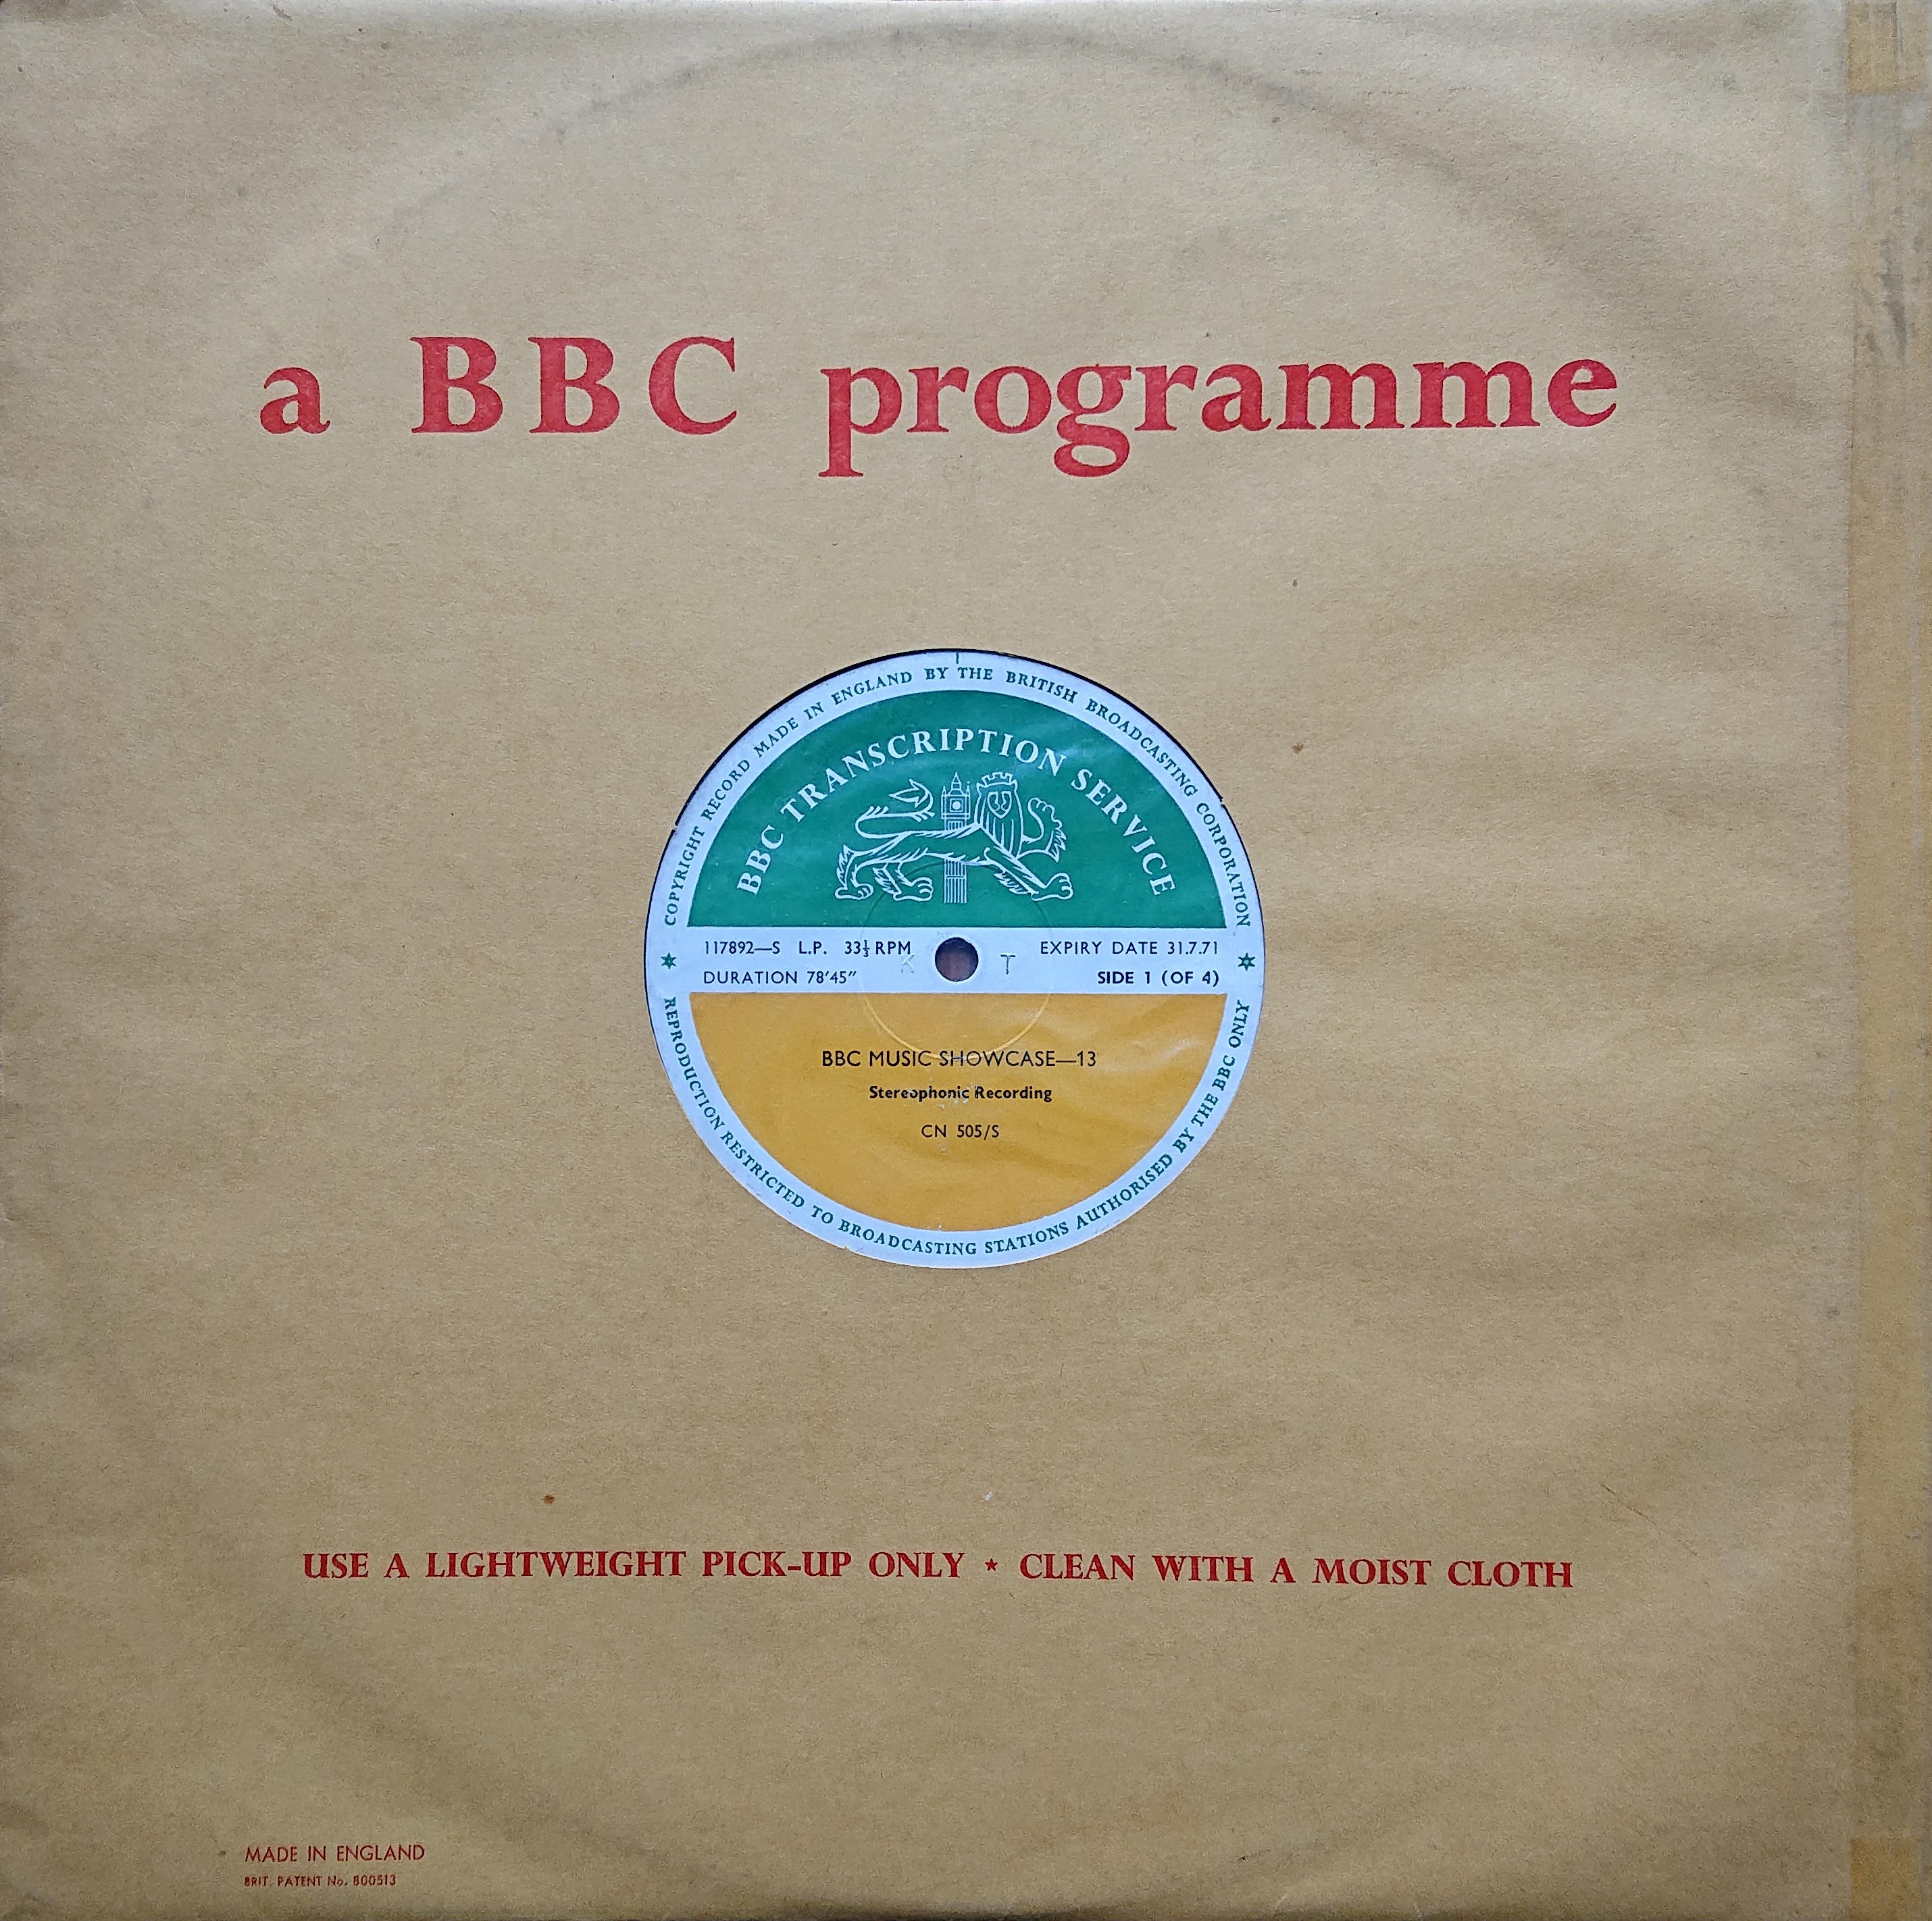 Picture of CN 505 S 25 BBC music showcase - 13 (Sides 1 & 3) by artist Various from the BBC albums - Records and Tapes library